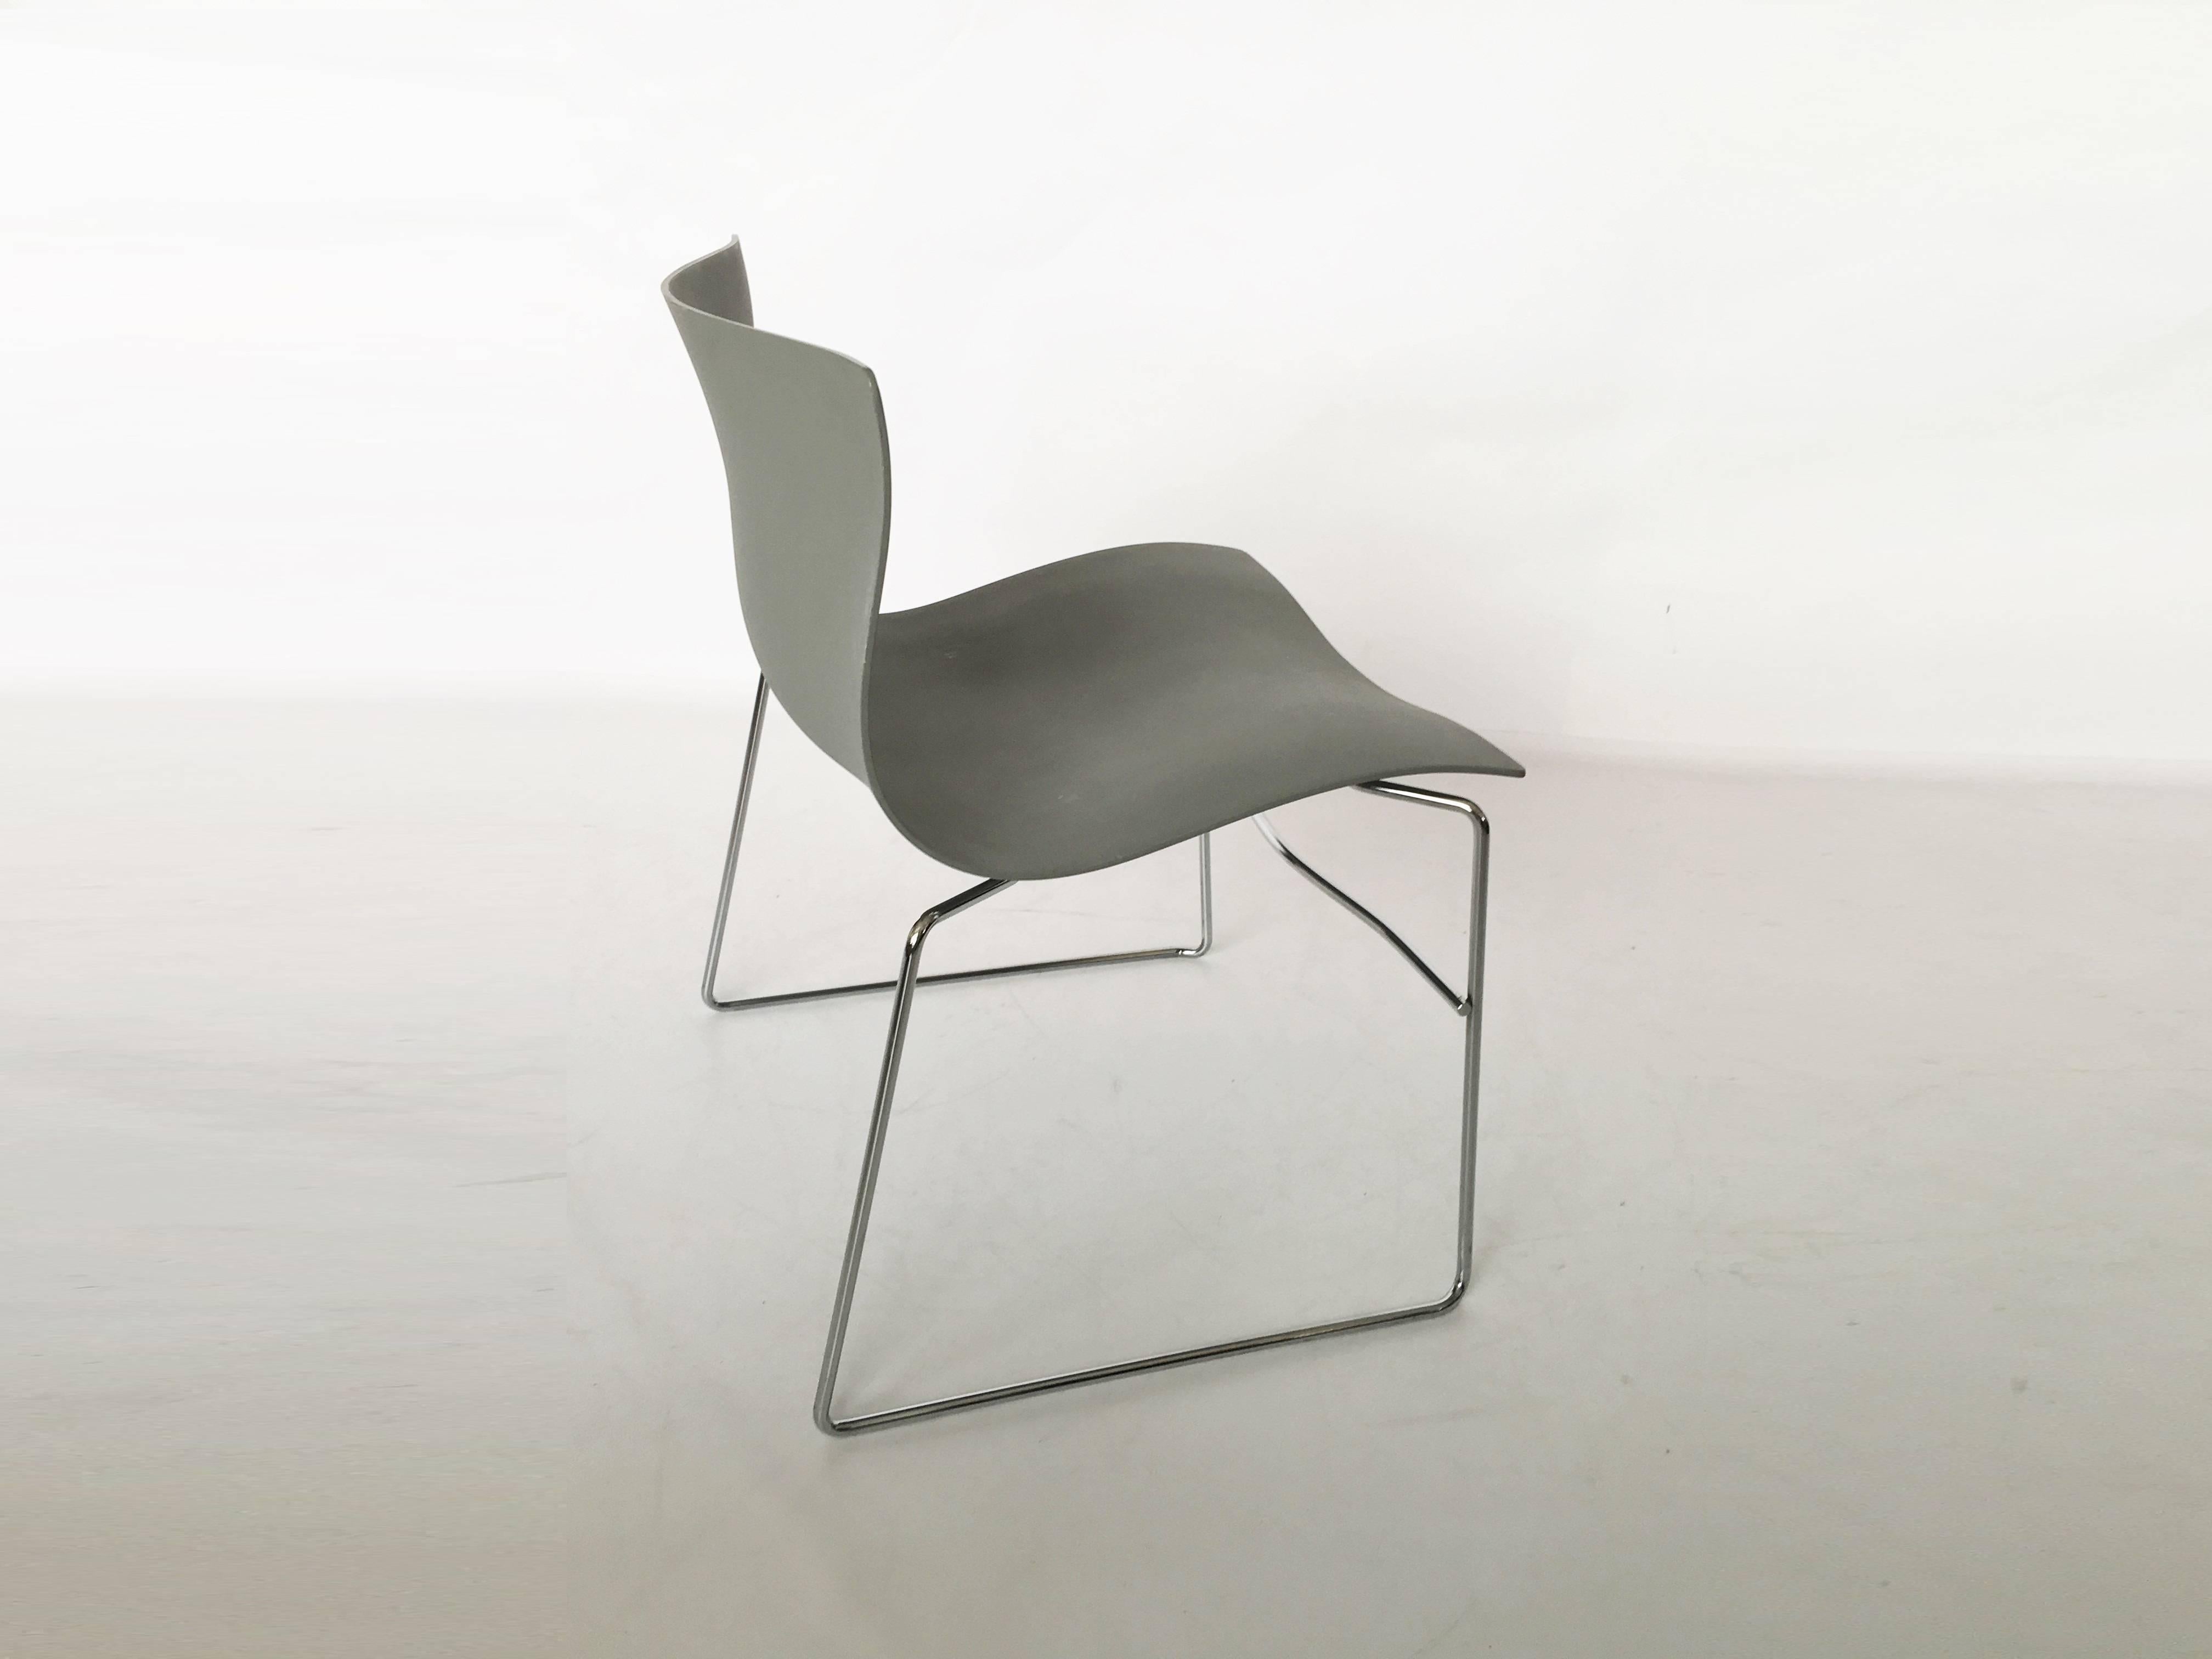 Late 20th Century Twenty Massimo Vignelli Handkerchief Chairs for Knoll in Gray For Sale